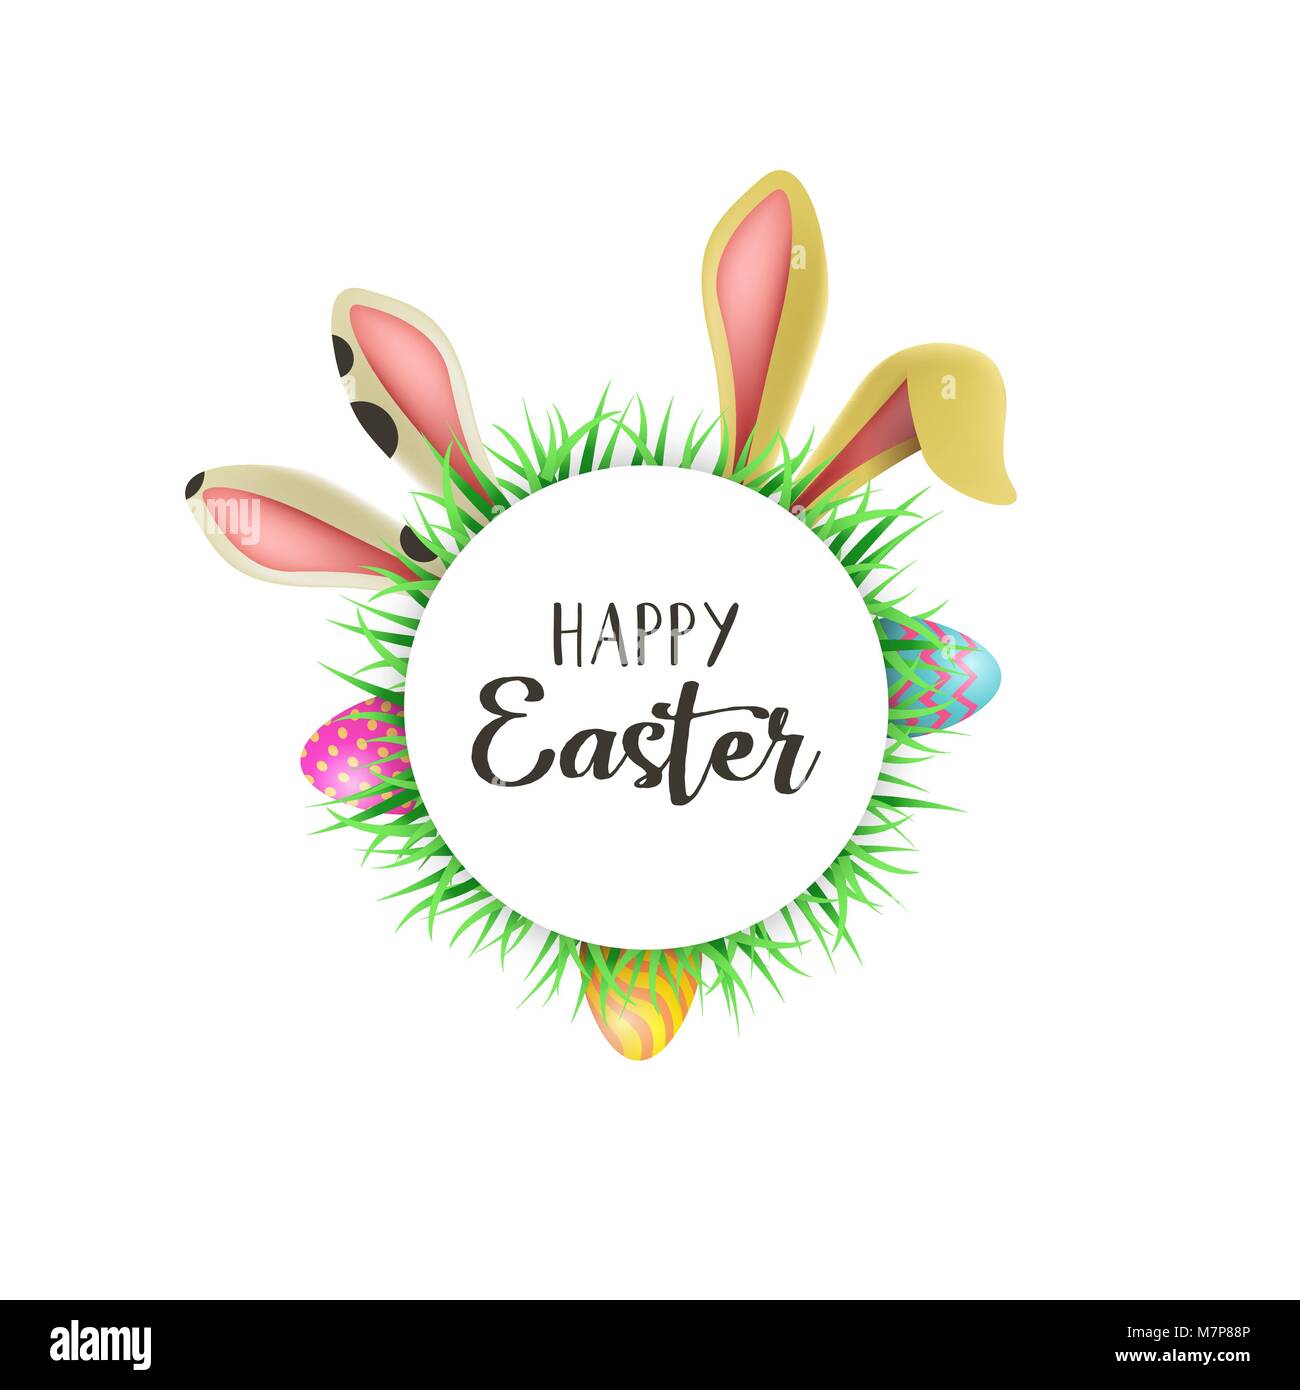 Happy Easter greeting card illustration with cute rabbit ears and painted eggs hiding in grass. Includes celebration text quote for spring time holida Stock Vector